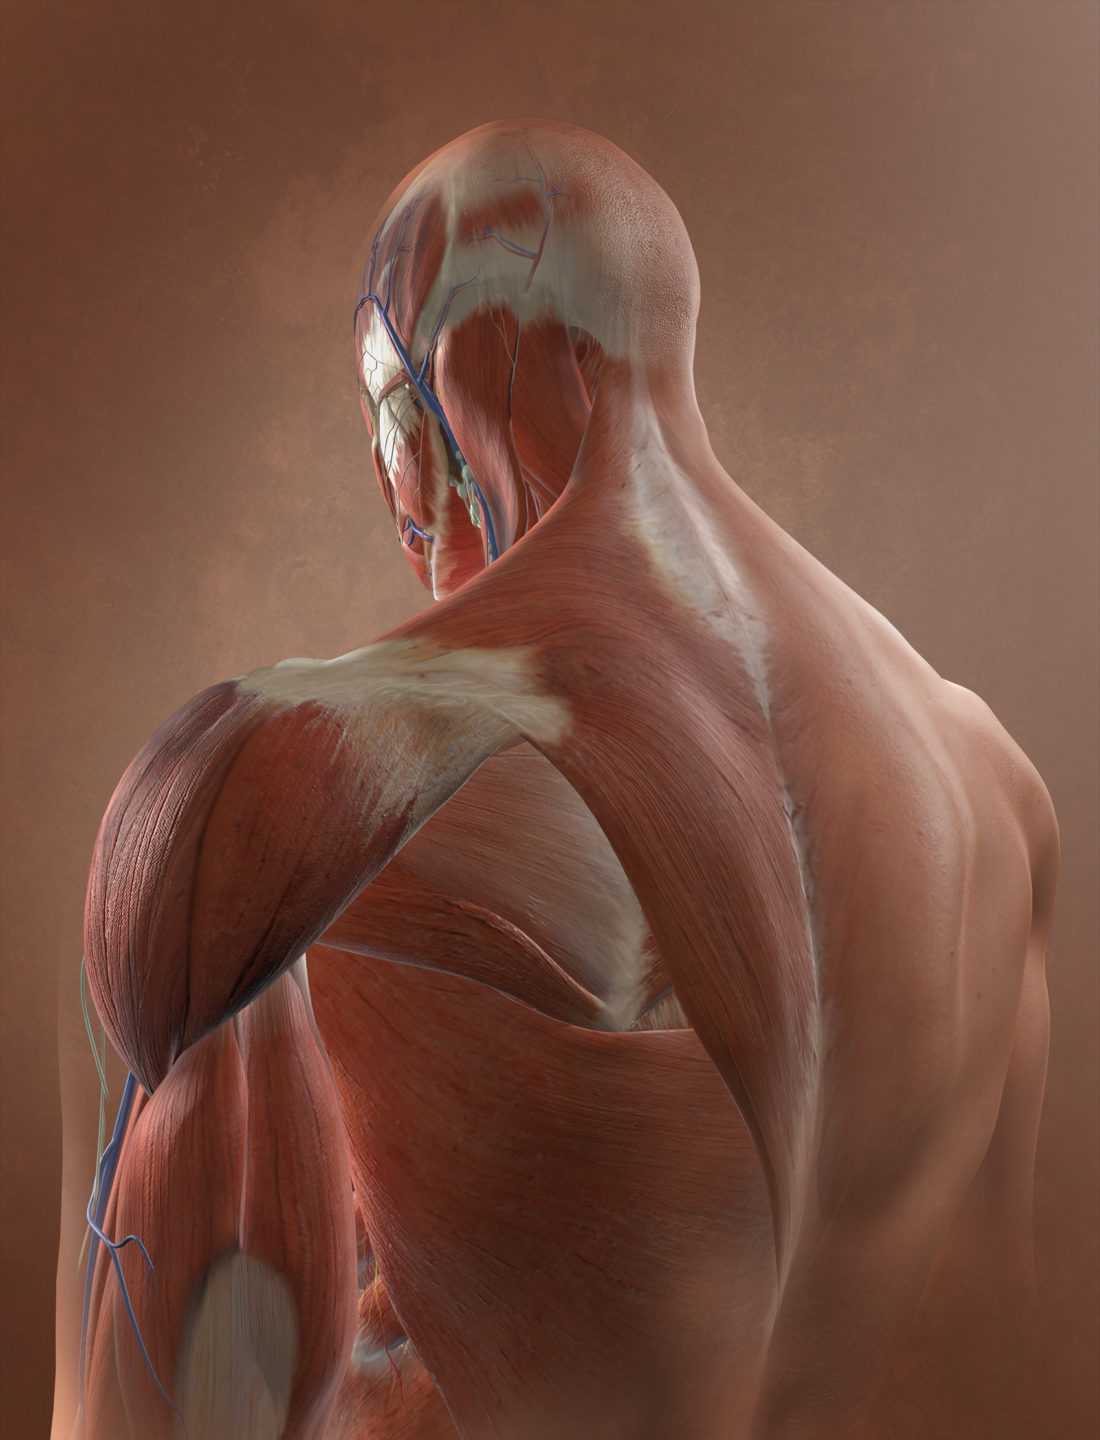 Back Muscles - A KYU Design